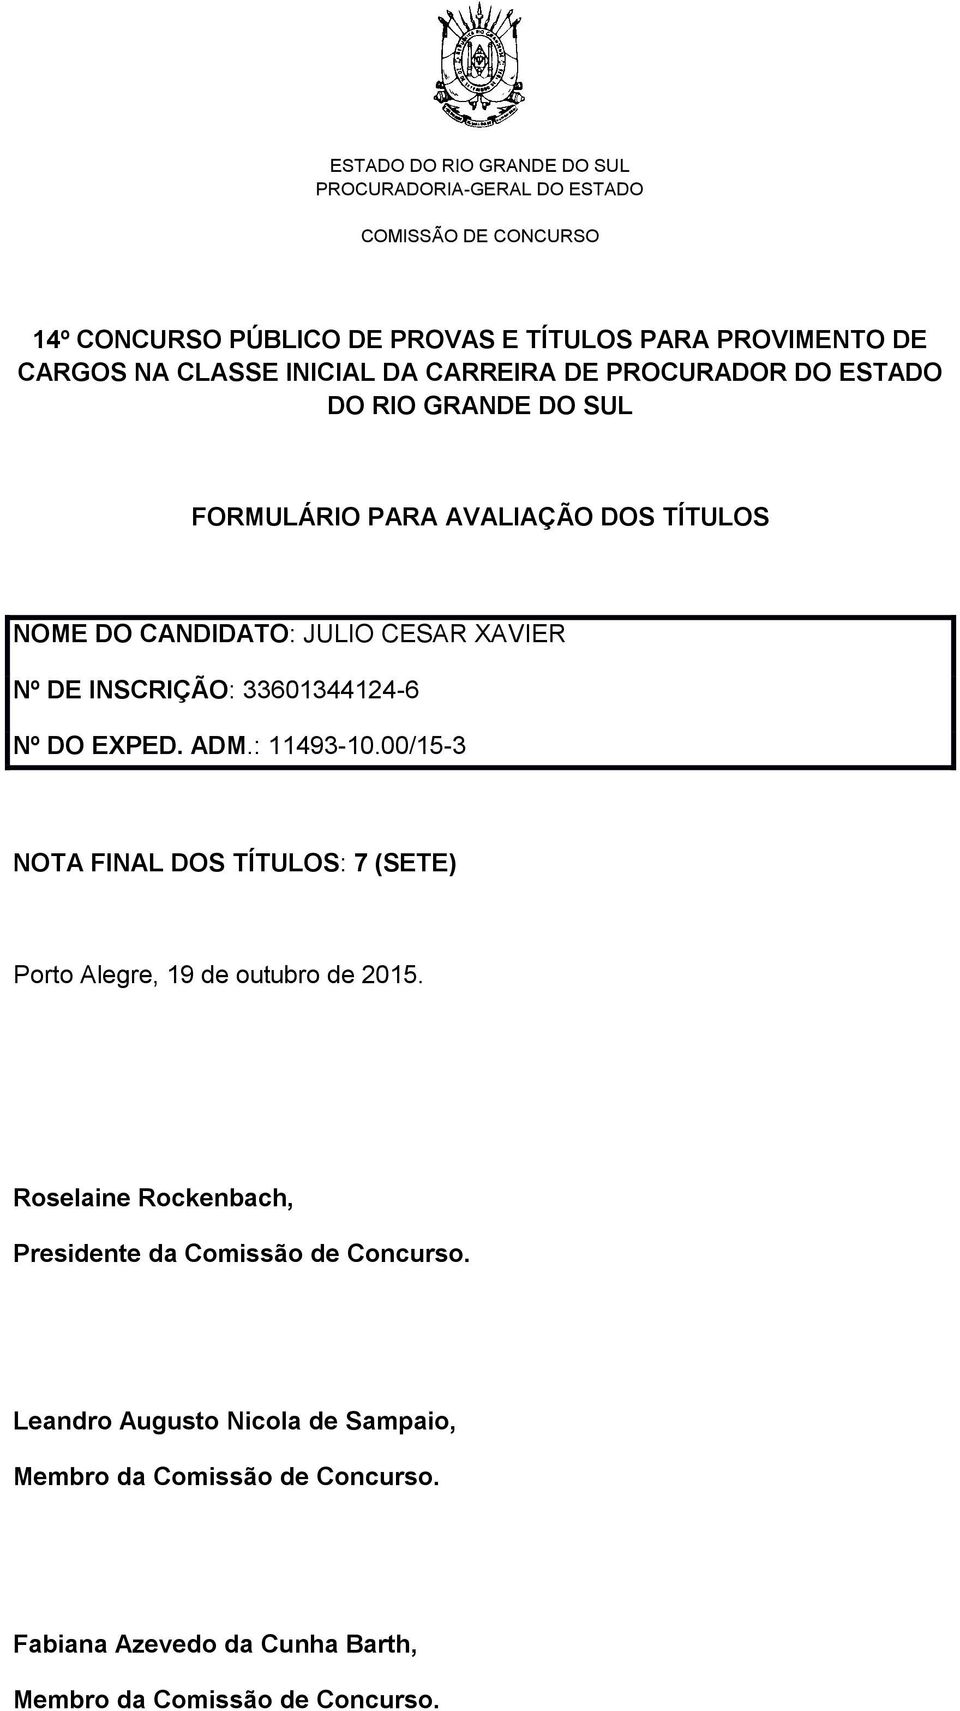 TÍTULOS NOME DO CANDIDATO: JULIO CESAR AVIER Nº DO EPED. ADM.: 11493-10.